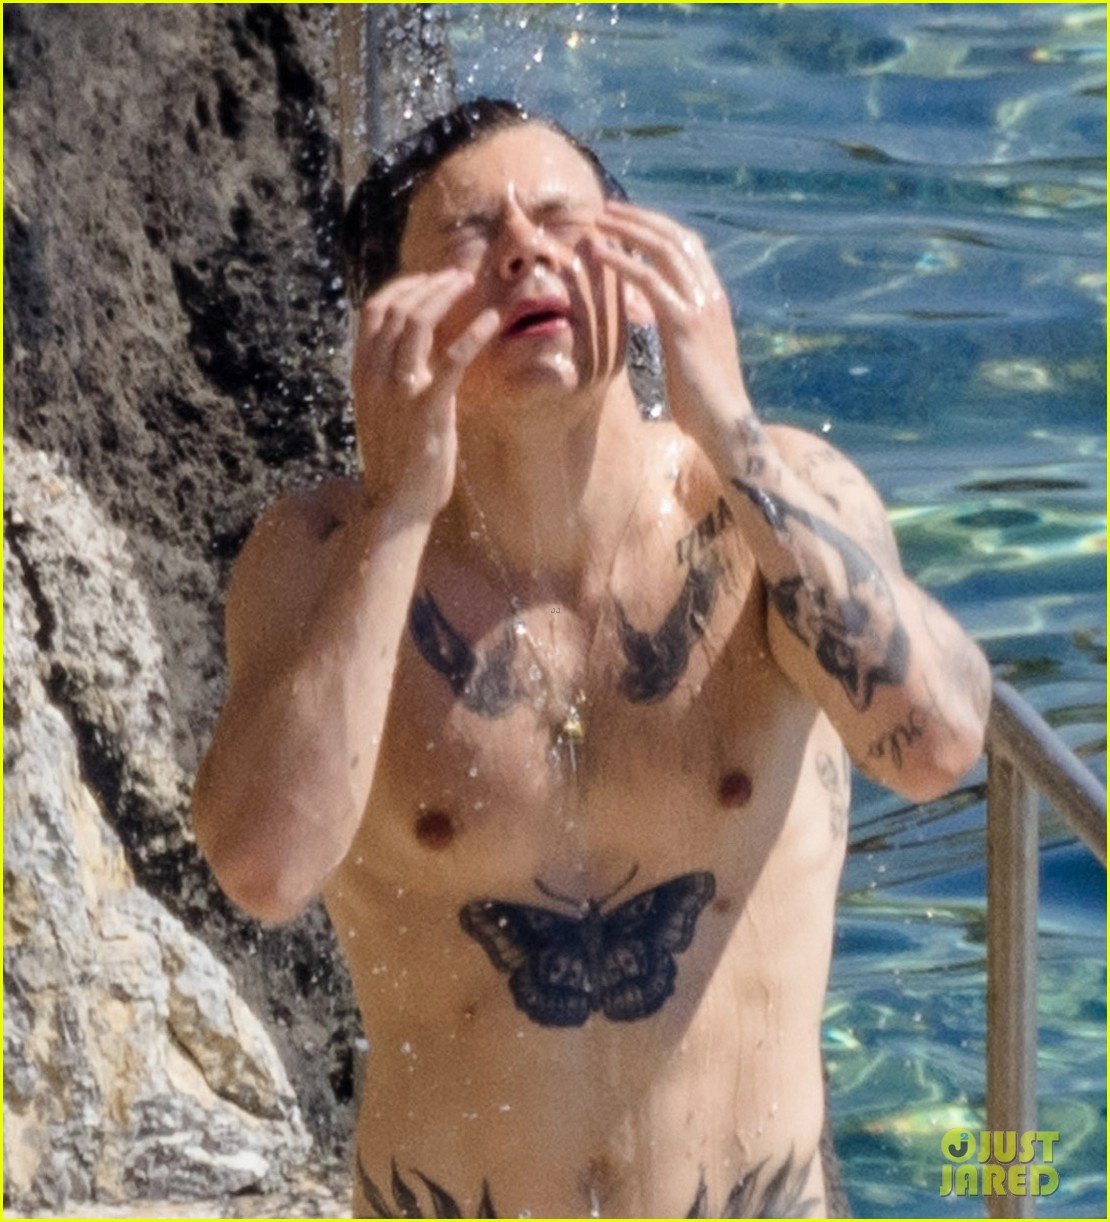 Shirtless Harry Styles Looks So Hot in These New Photos from Italy